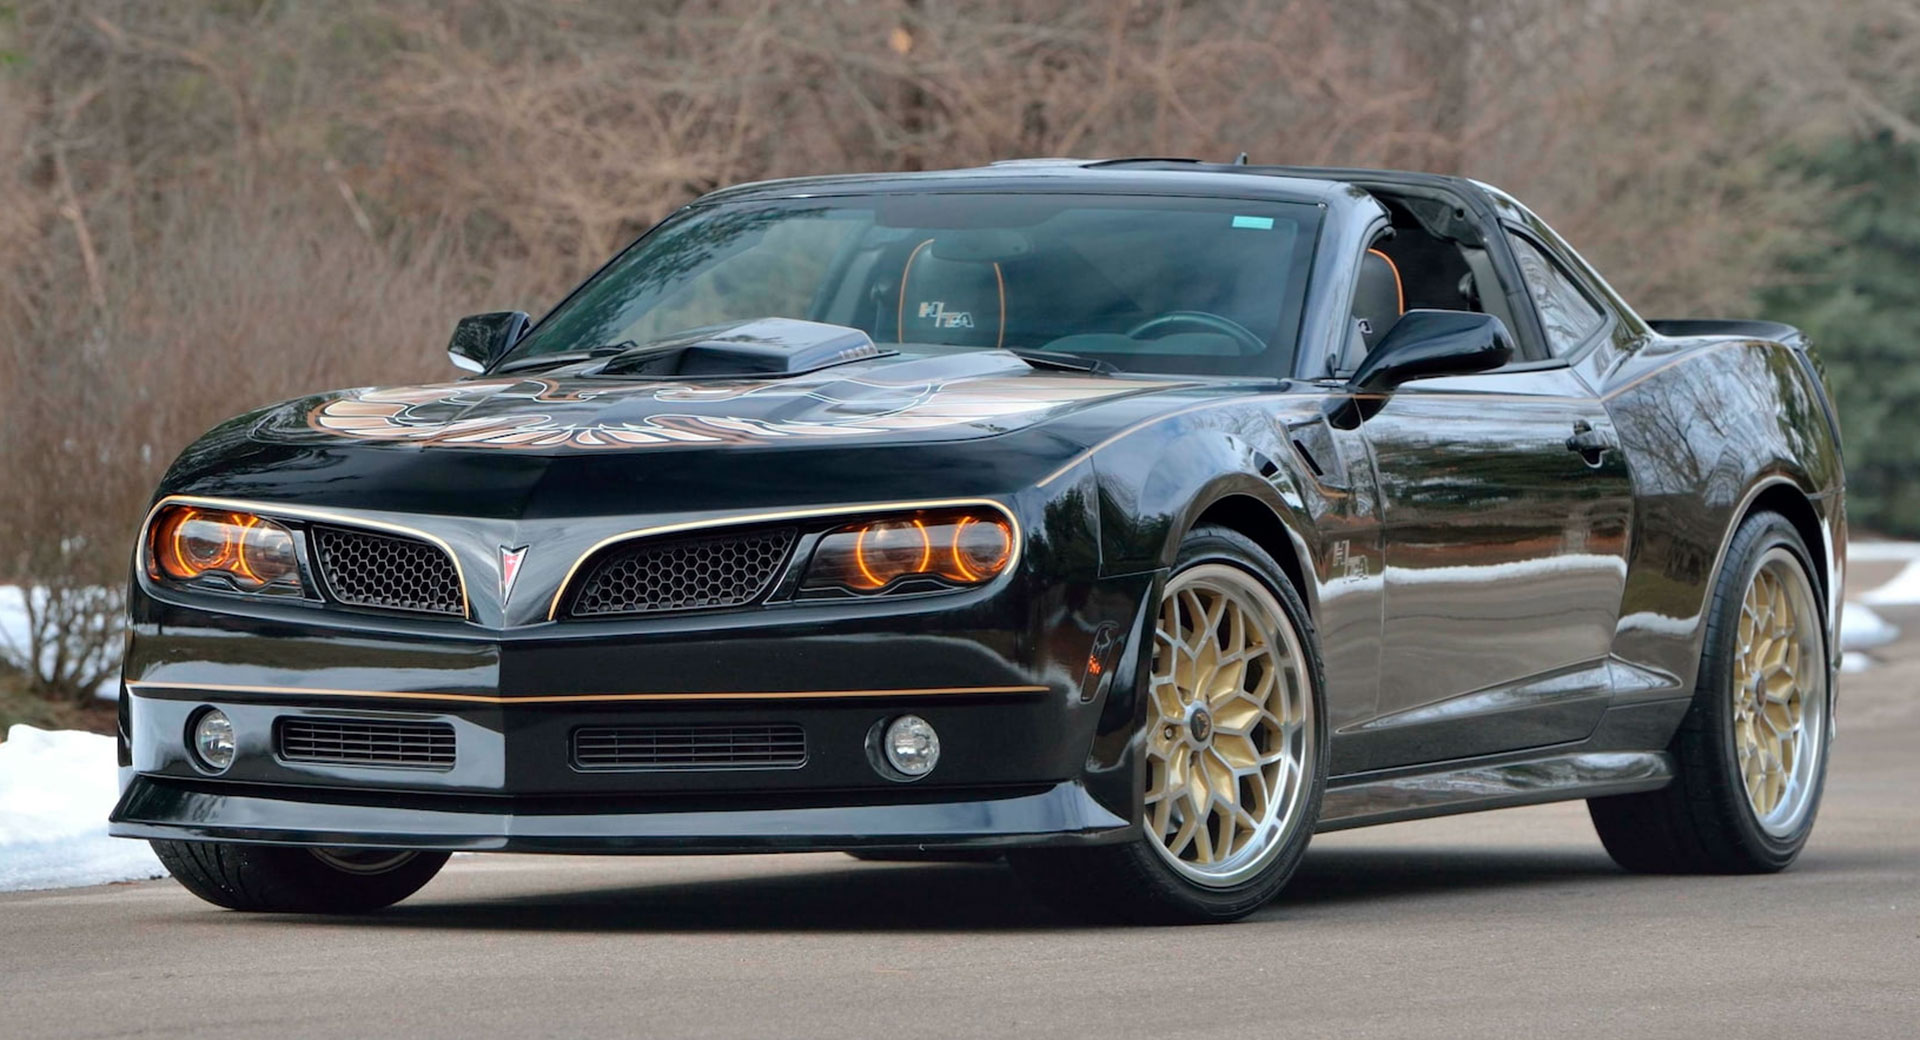 2014 Camaro-Based Pontiac Trans AM Hurst Edition Is An Intriguing 650 HP  Throwback | Carscoops